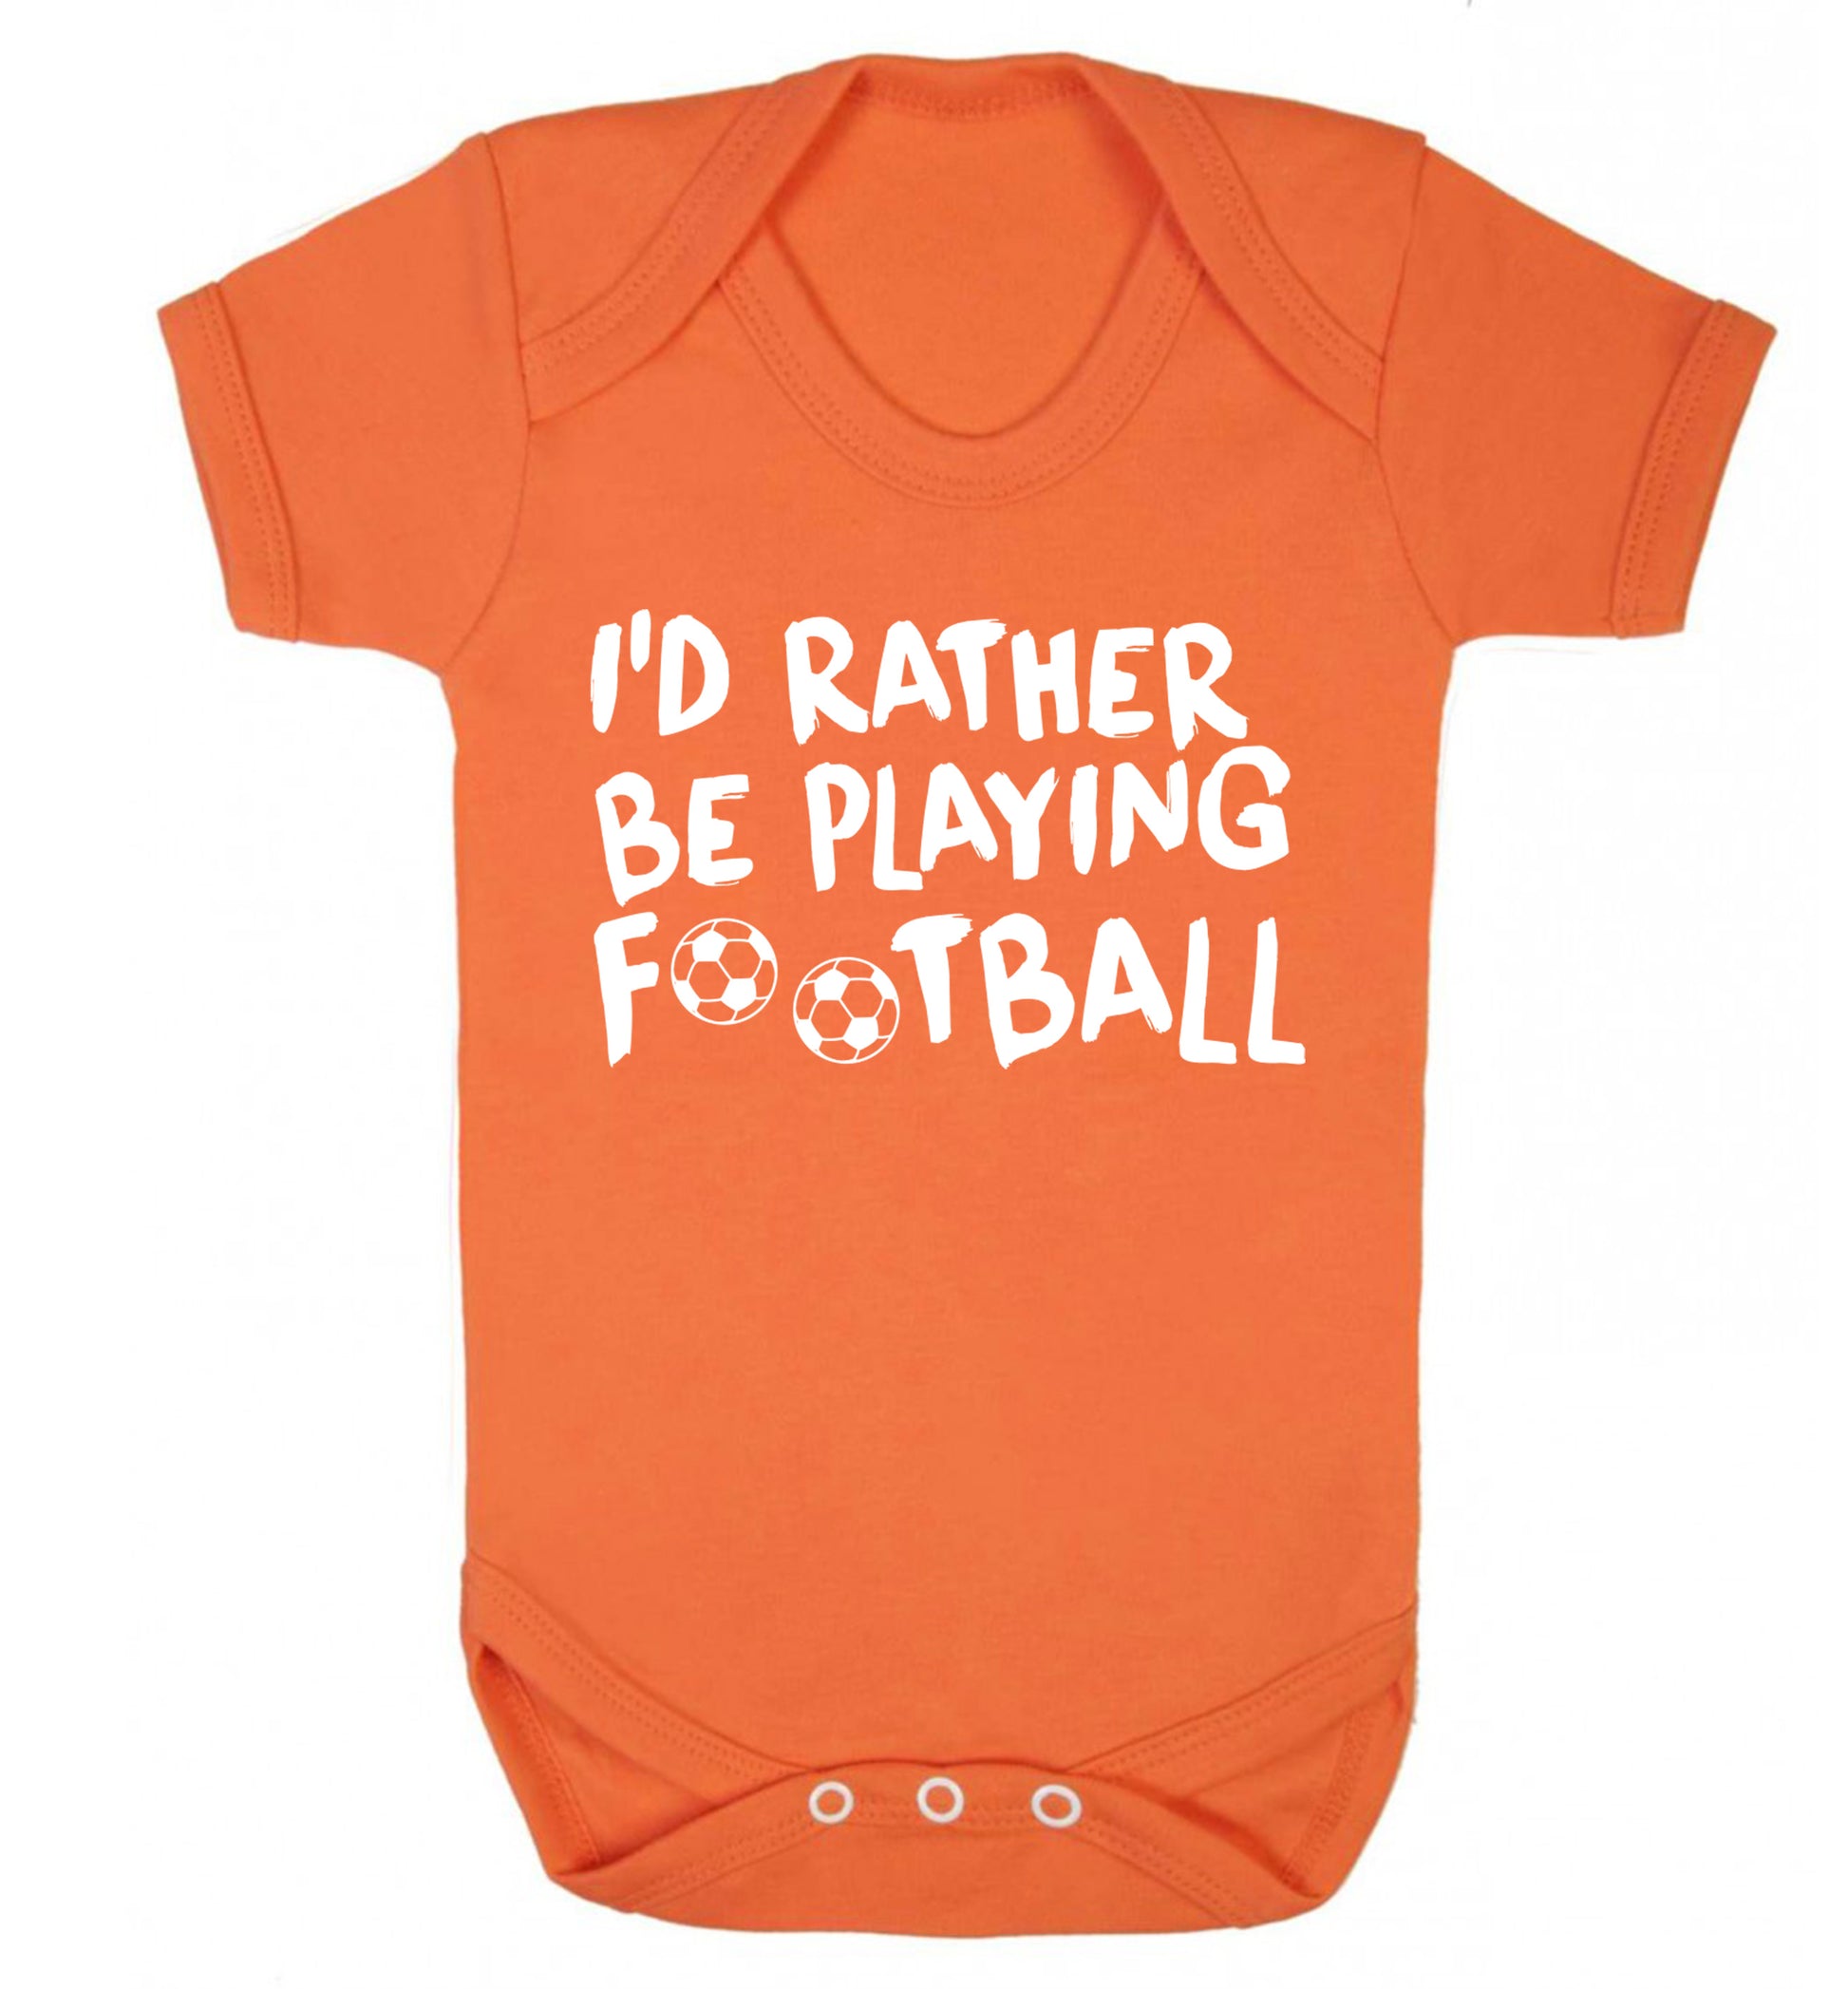 I'd rather be playing football Baby Vest orange 18-24 months